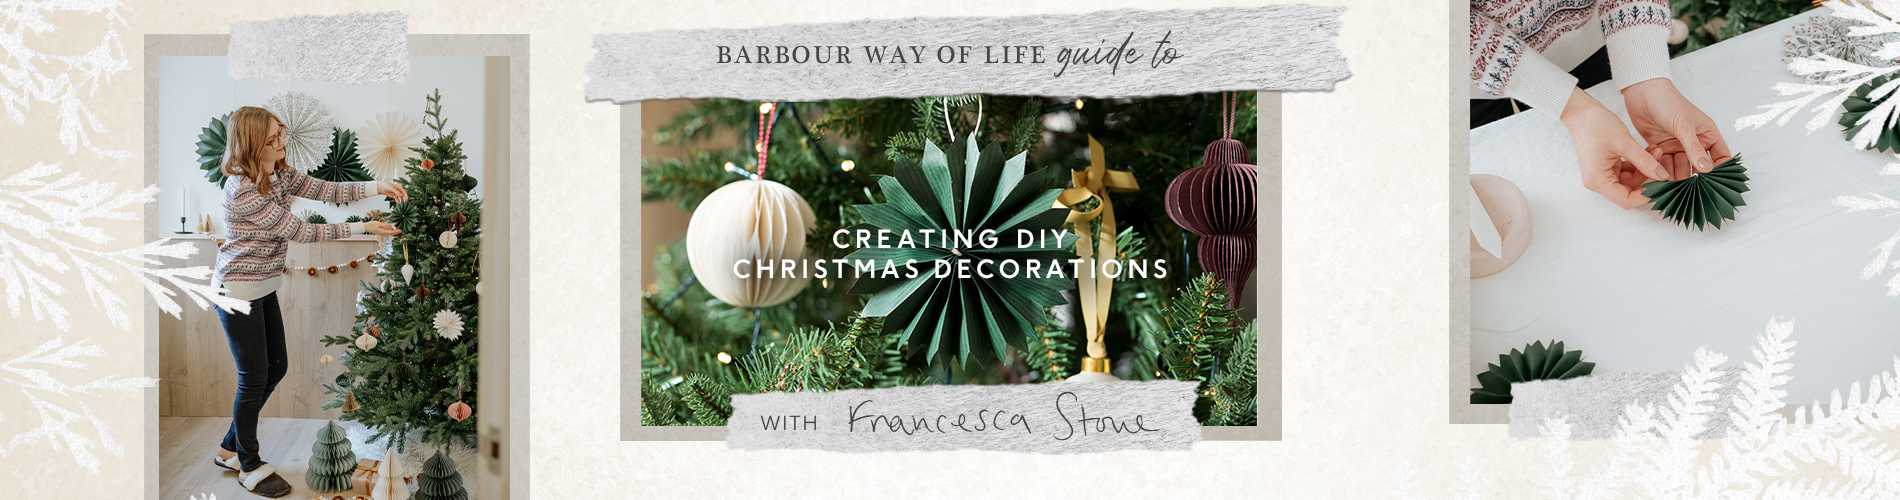 How to Make DIY Christmas Decorations: Barbour Way of Life Guides 